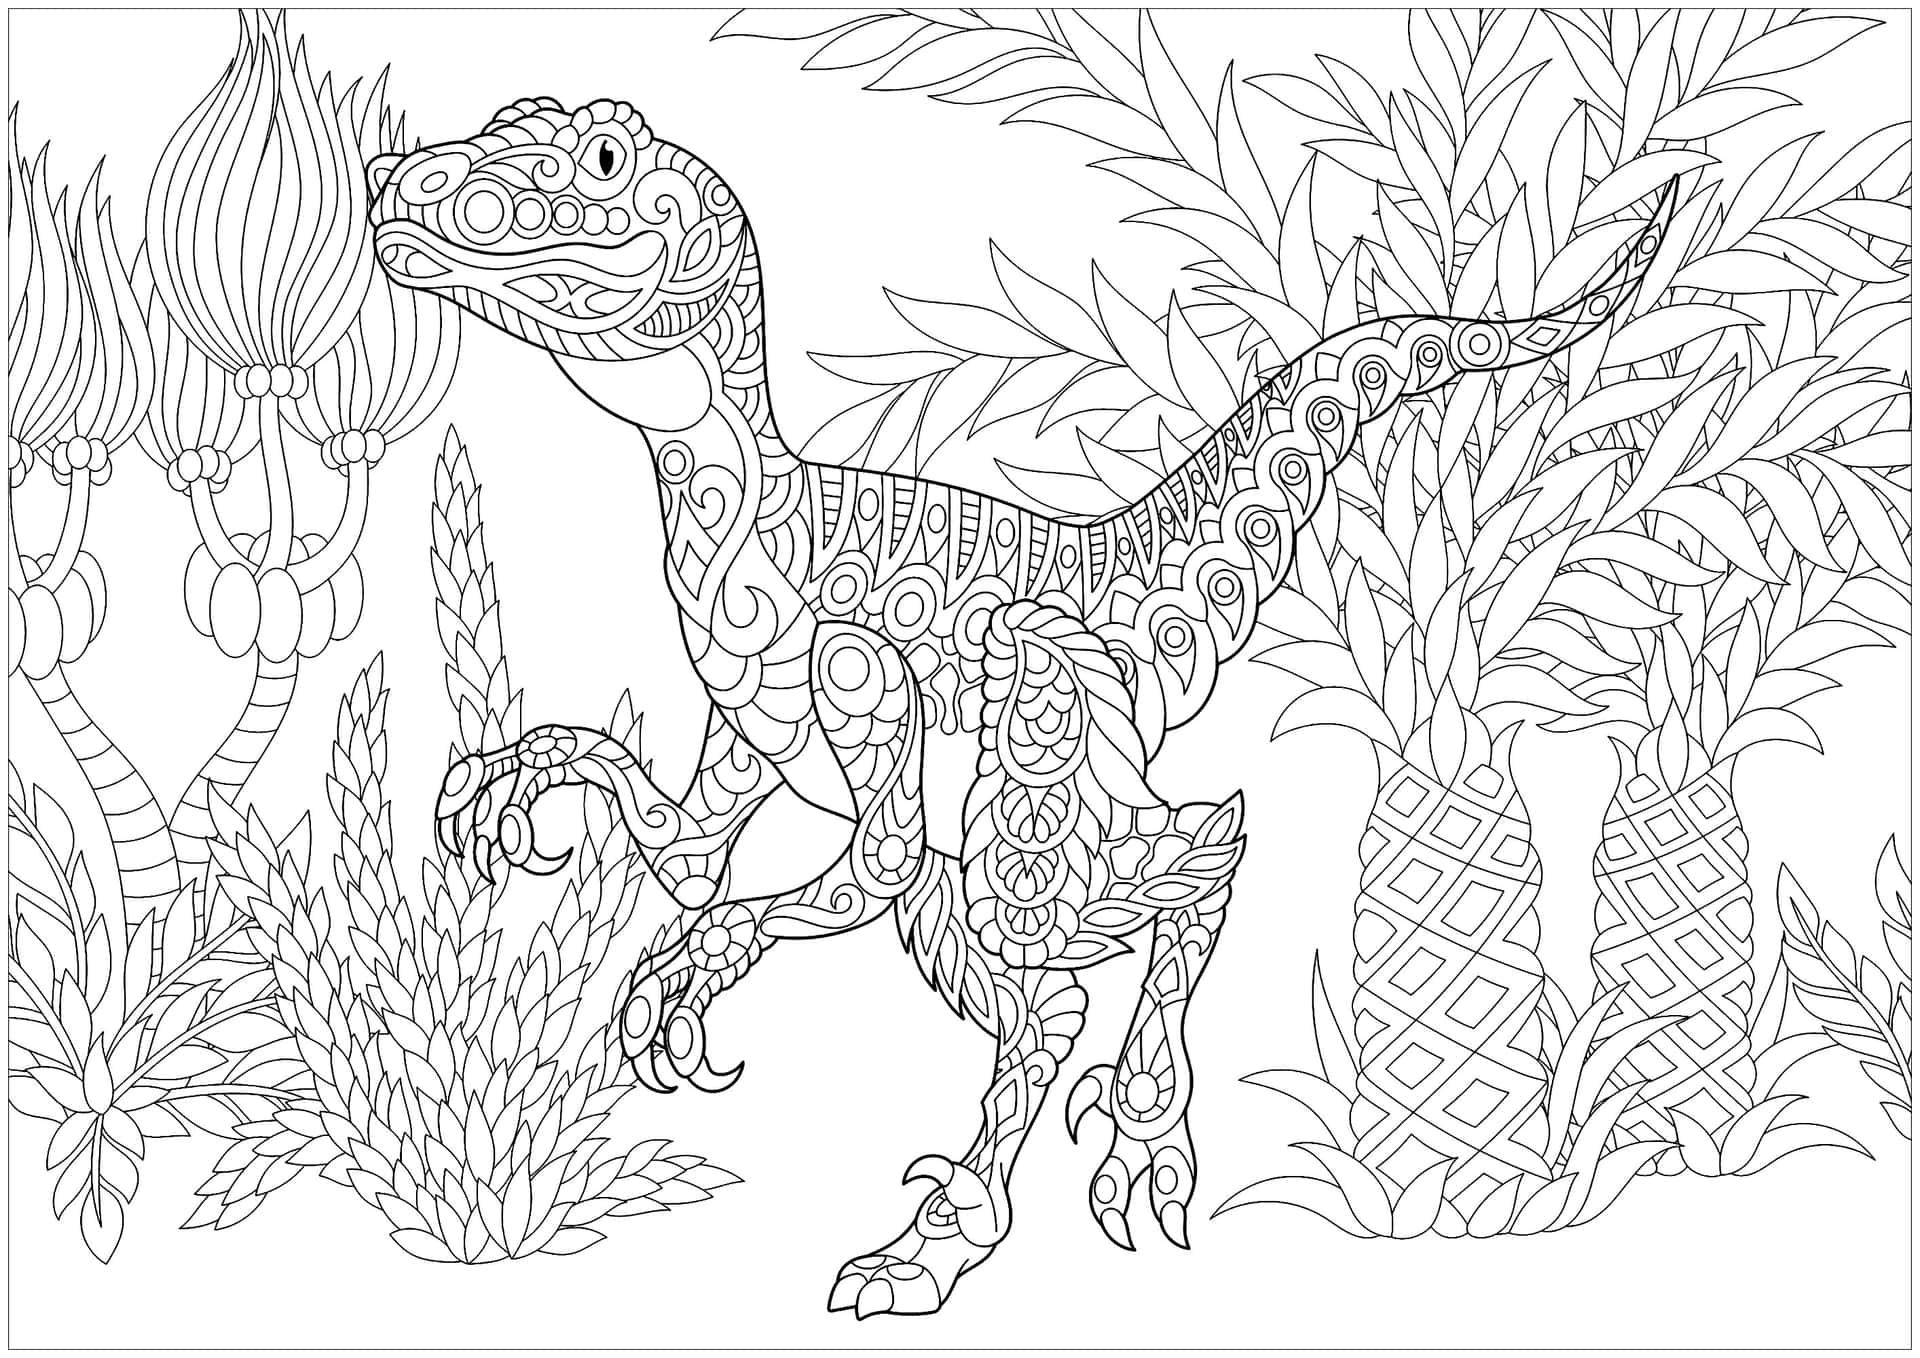 A Dinosaur Coloring Page With Plants And Flowers